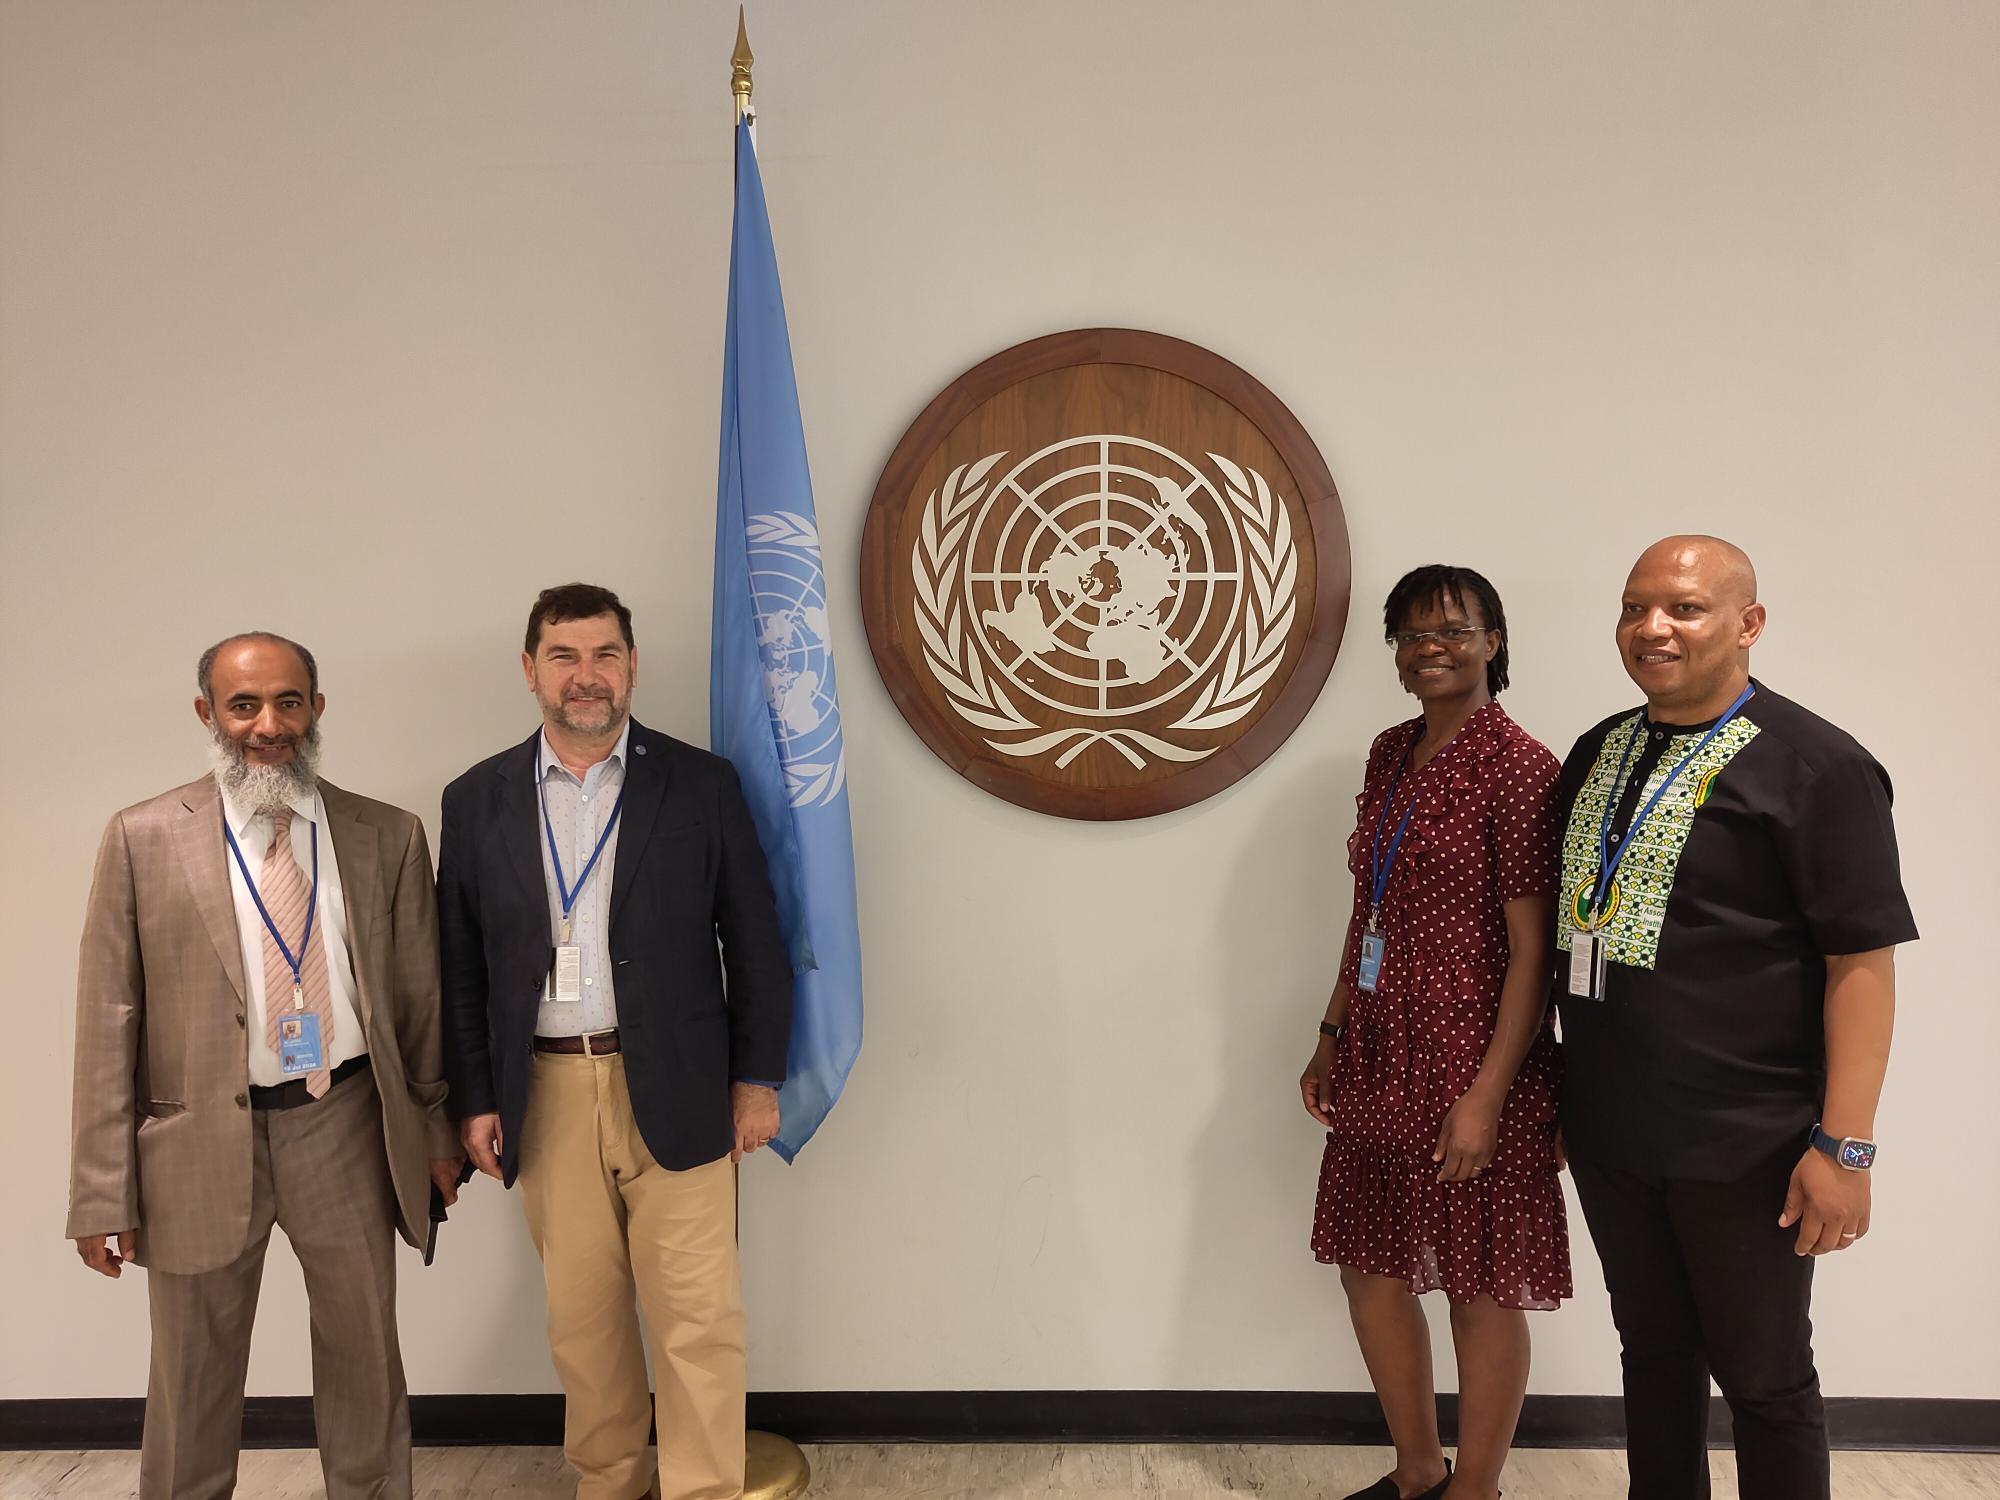 Four people in front of a UN logo and flag